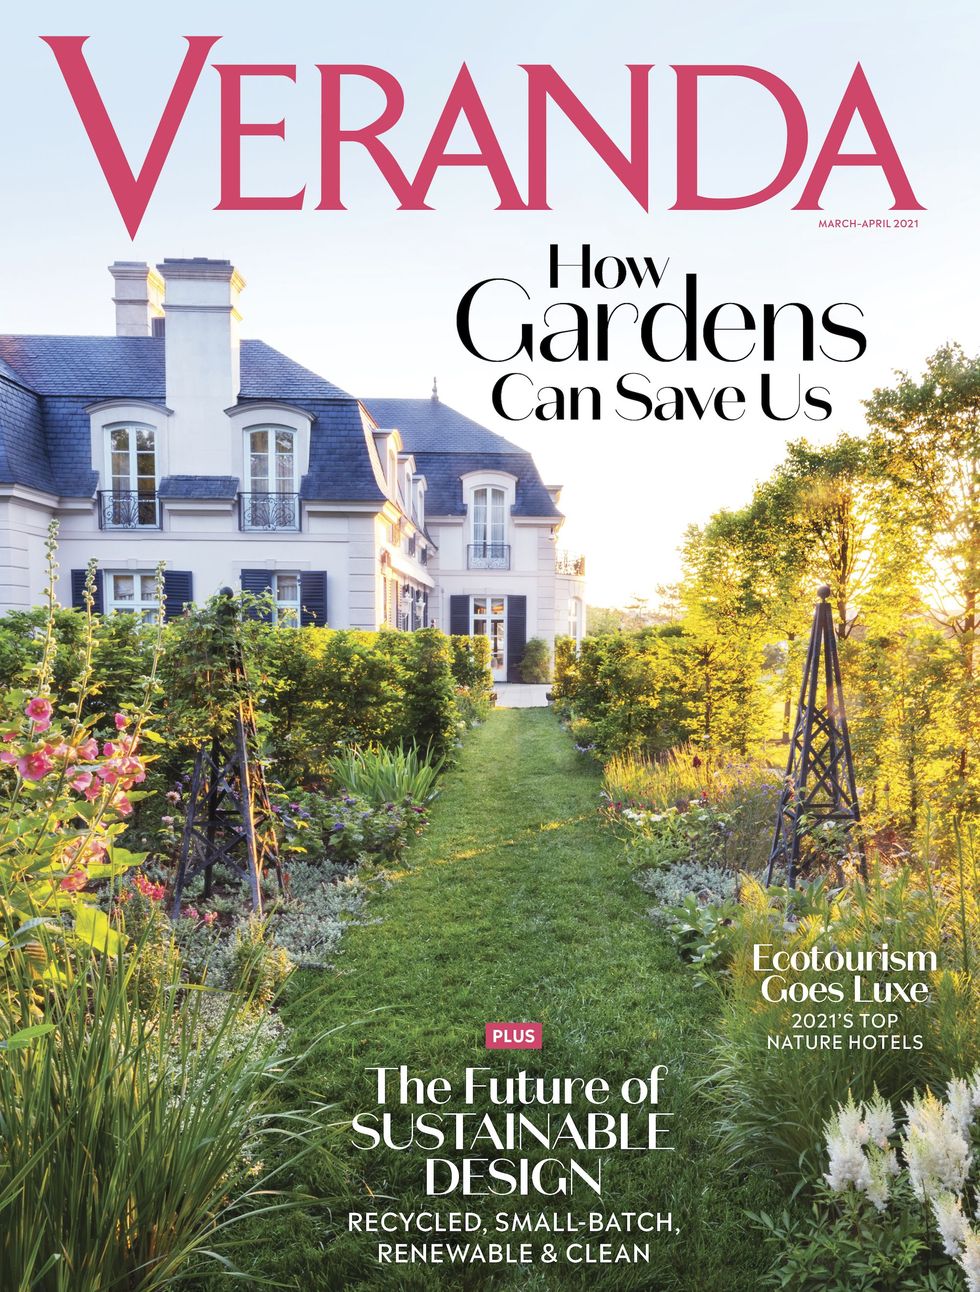 This article originally appeared in the March/April 2021 issue of VERANDA.